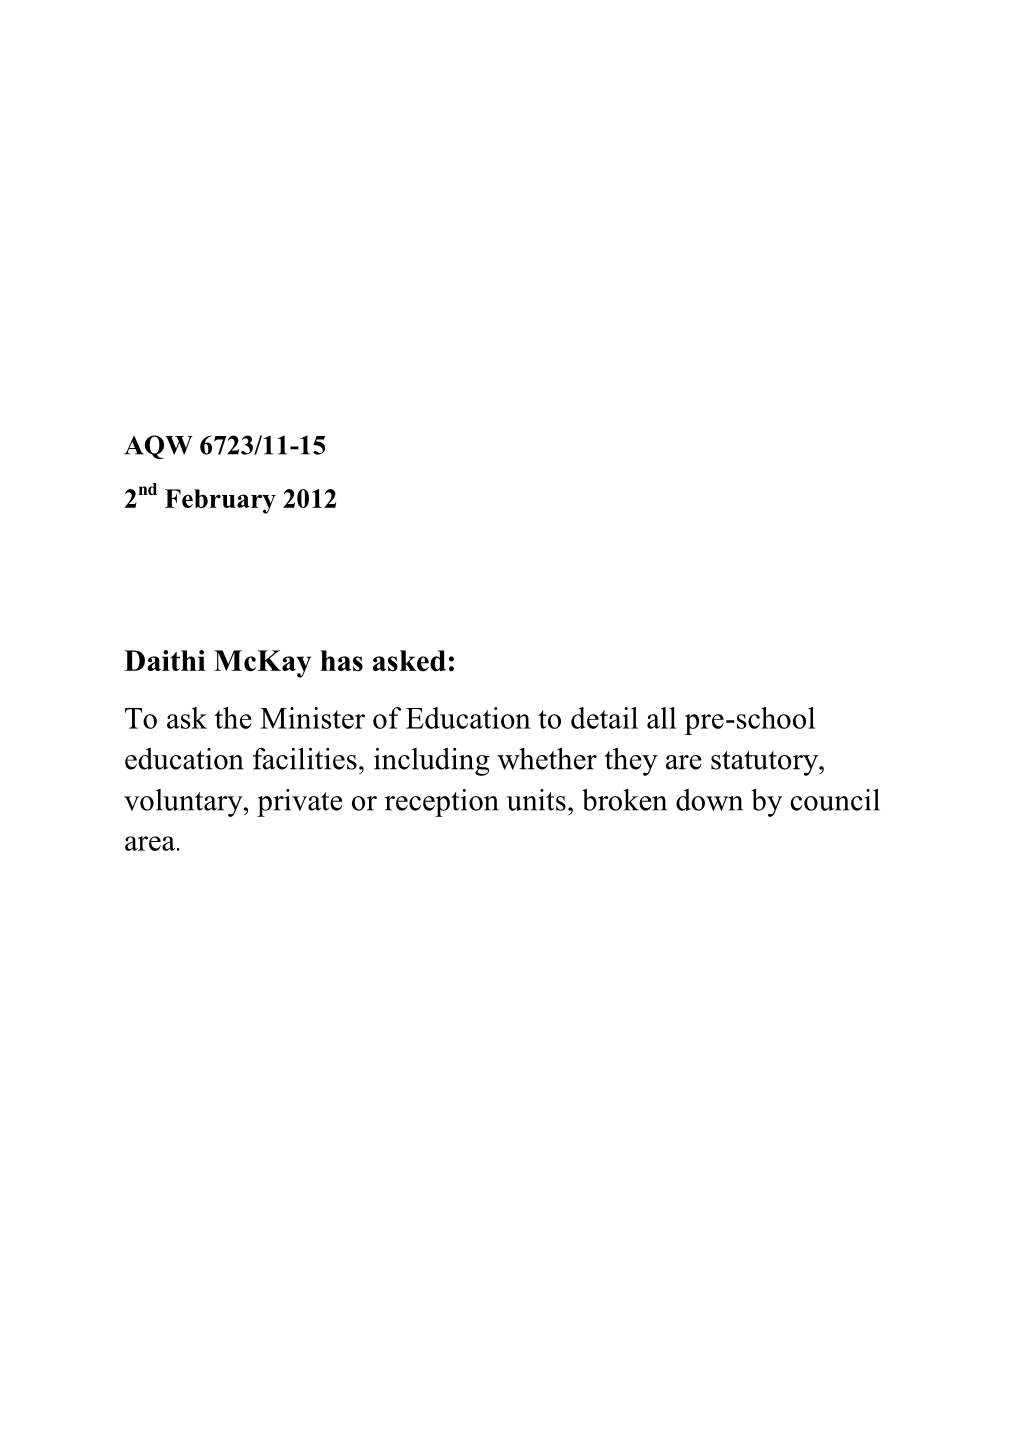 Daithi Mckay Has Asked: to Ask the Minister of Education to Detail All